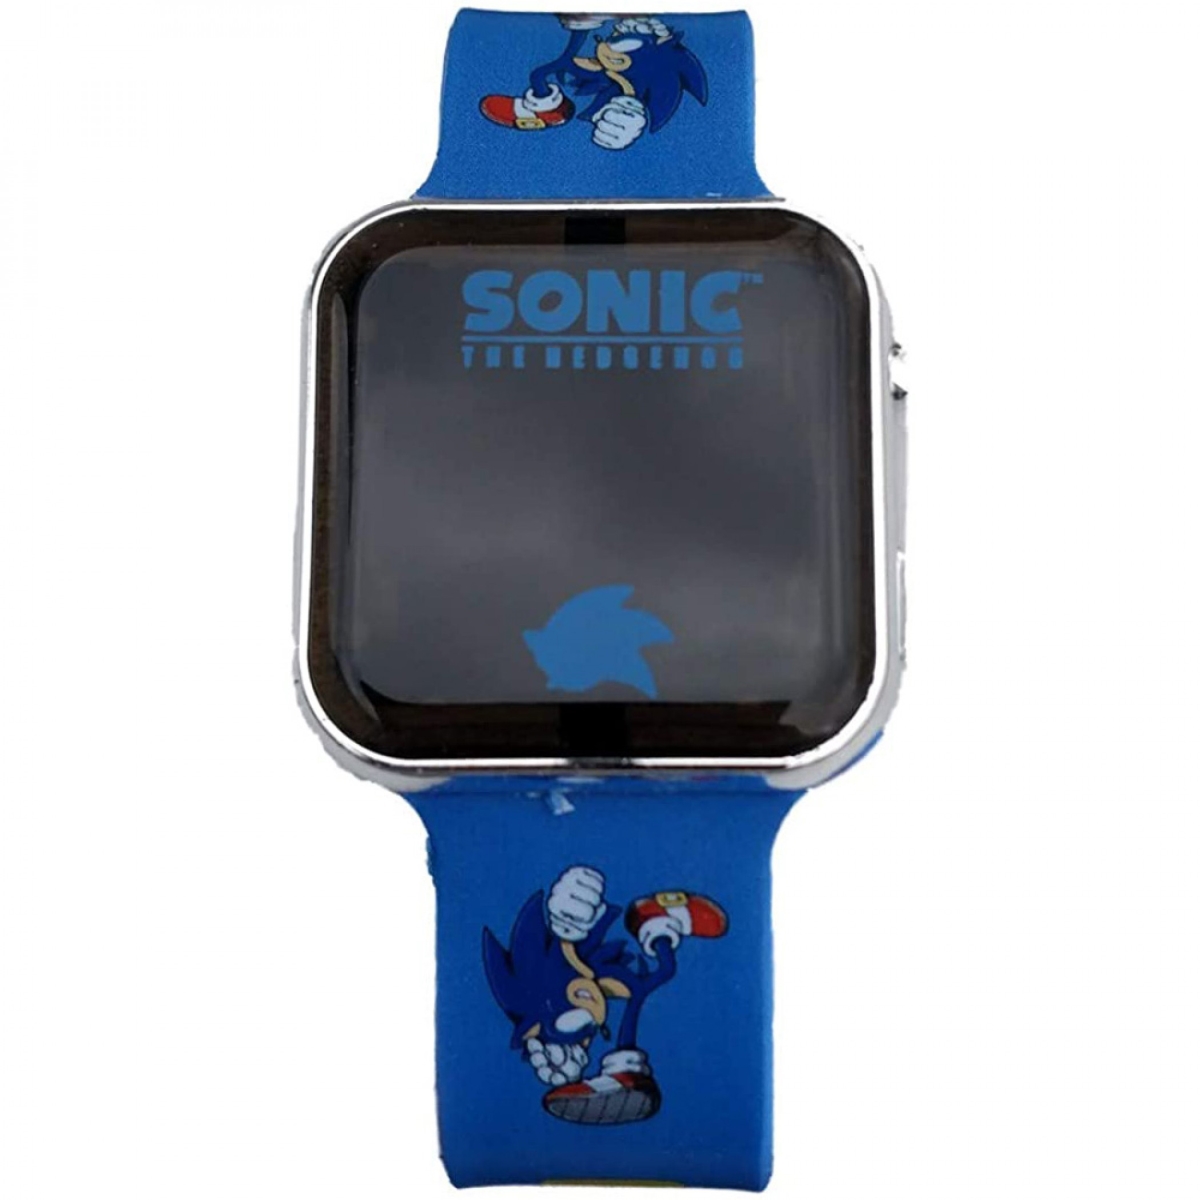 Picture of Sonic 846711 The Hedgehog Digital Watch with 16-bit Character Rubber Strap